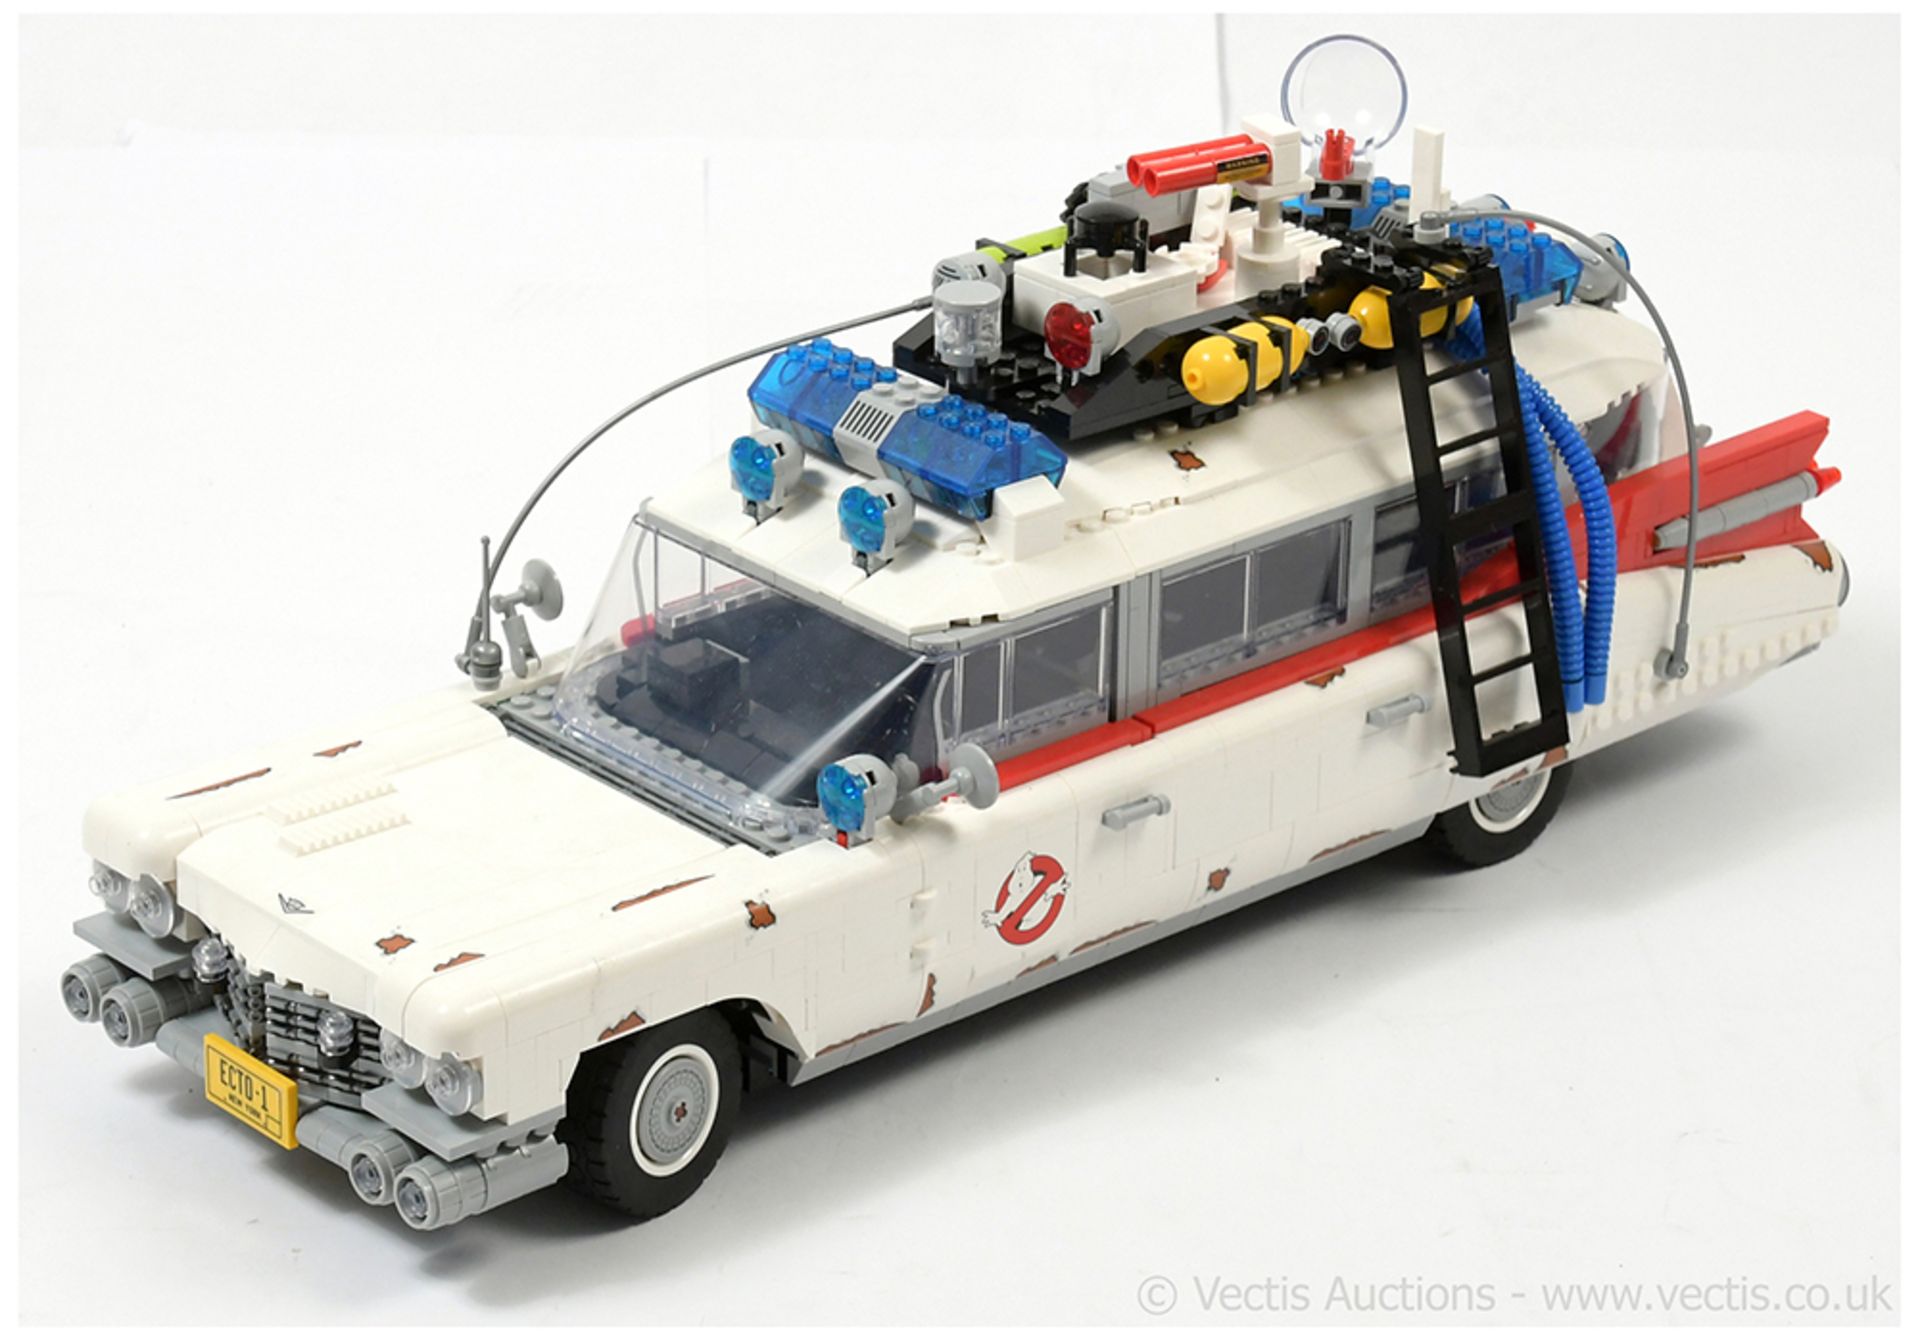 Lego set number 10274 Ghostbusters Ecto-1, built